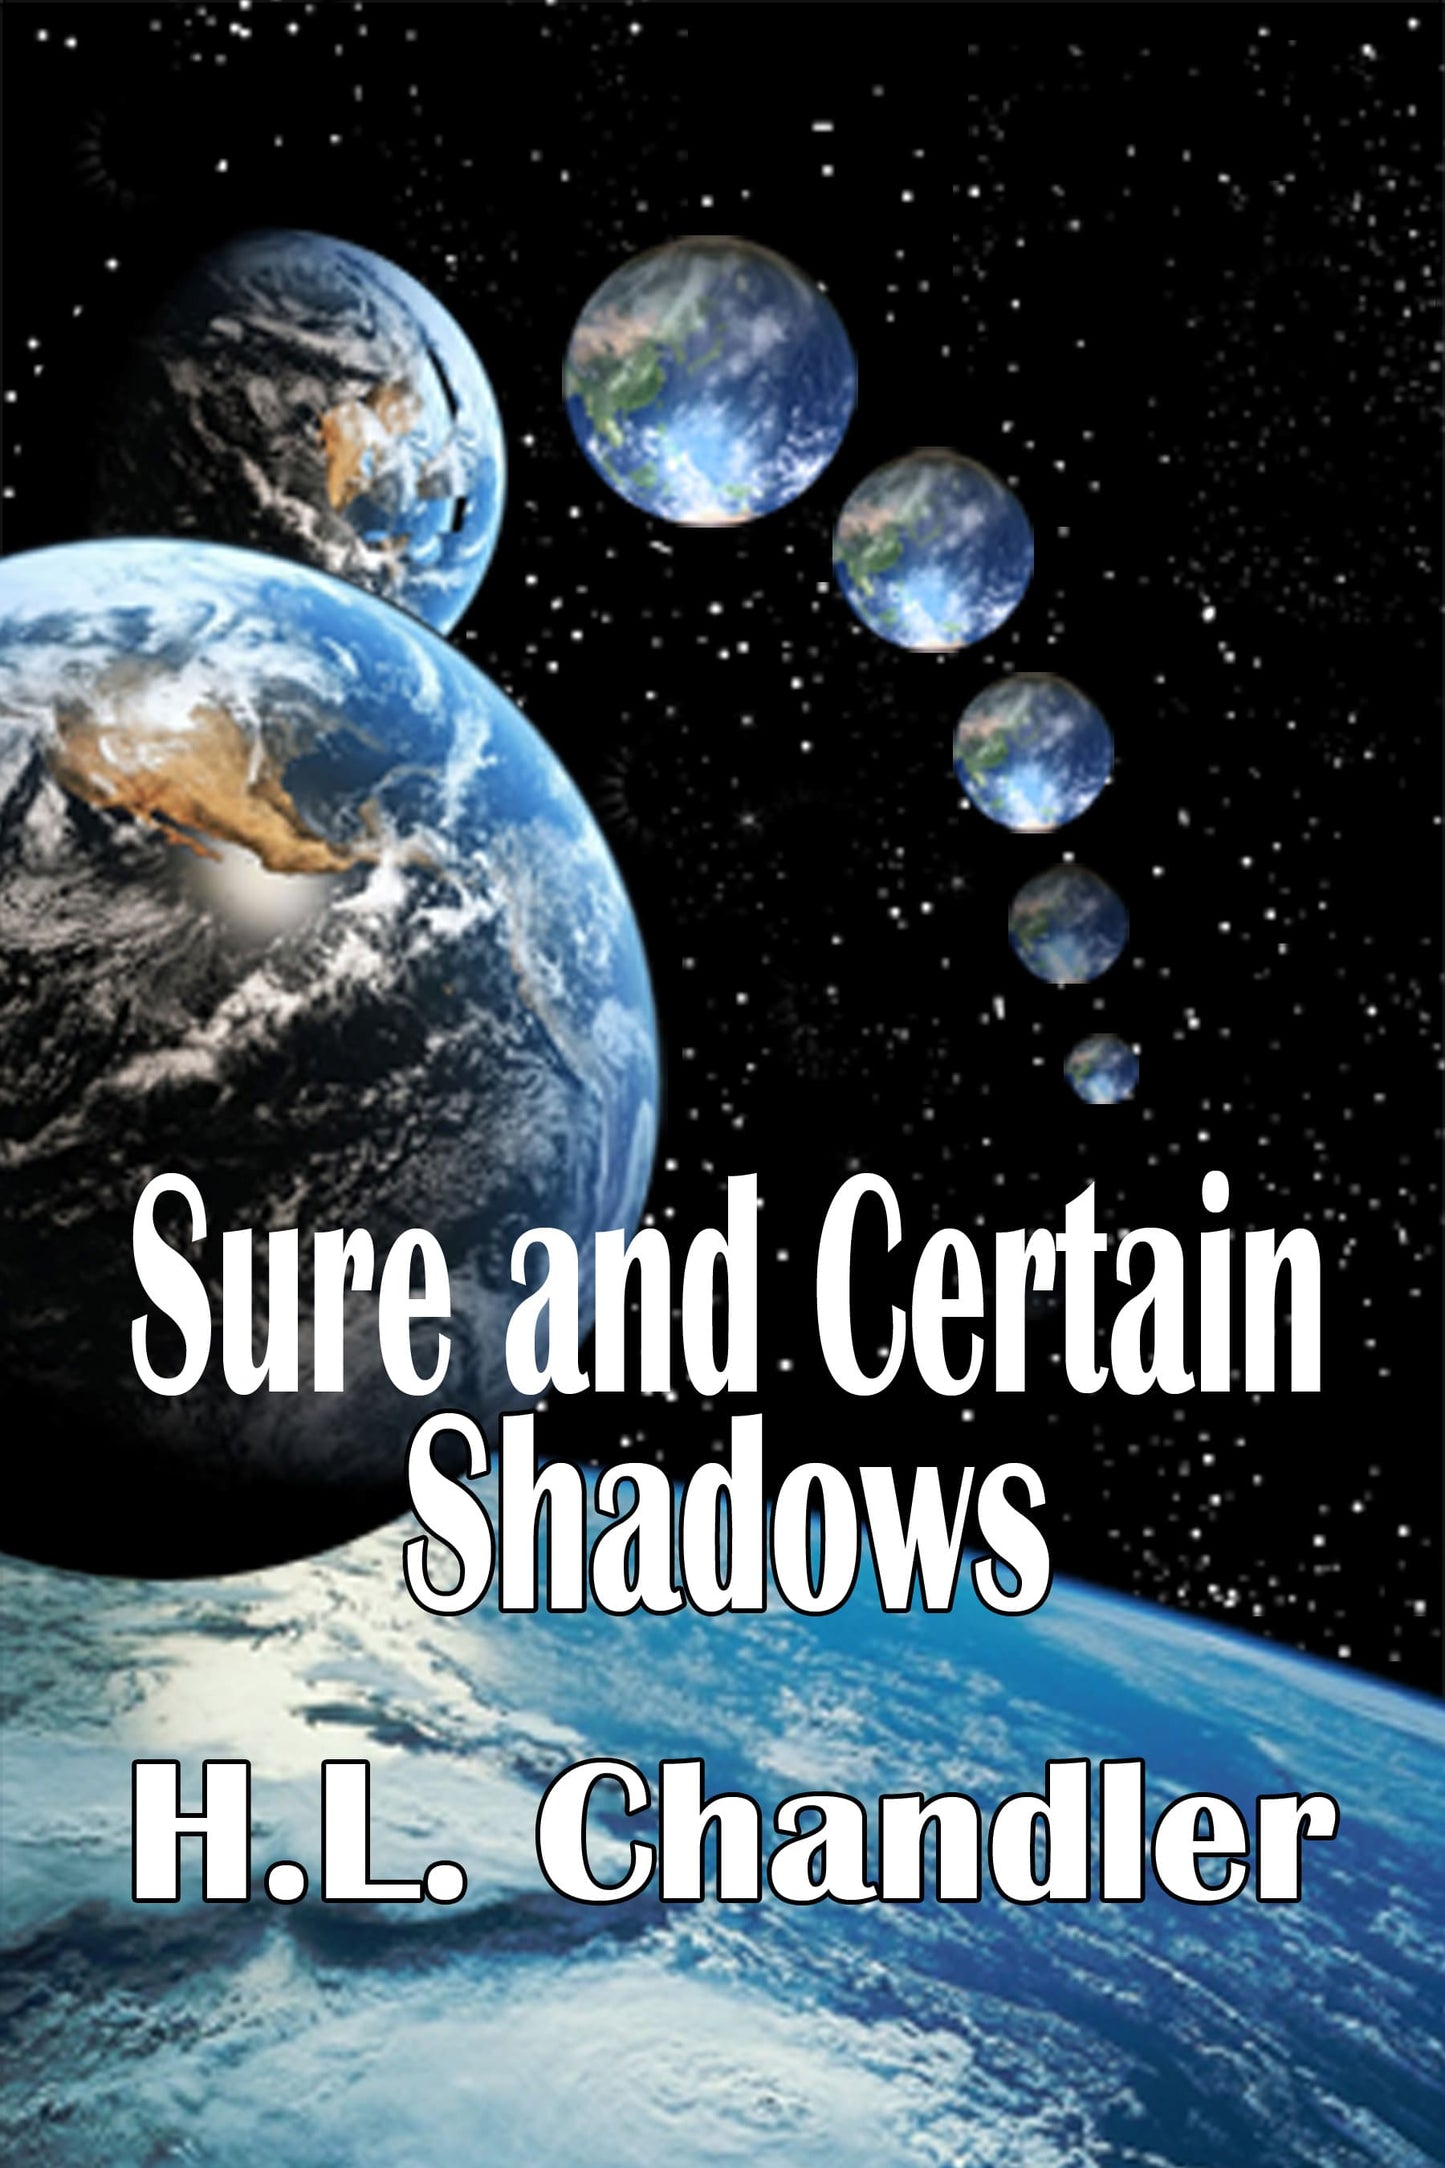 Sure and Certain Shadows